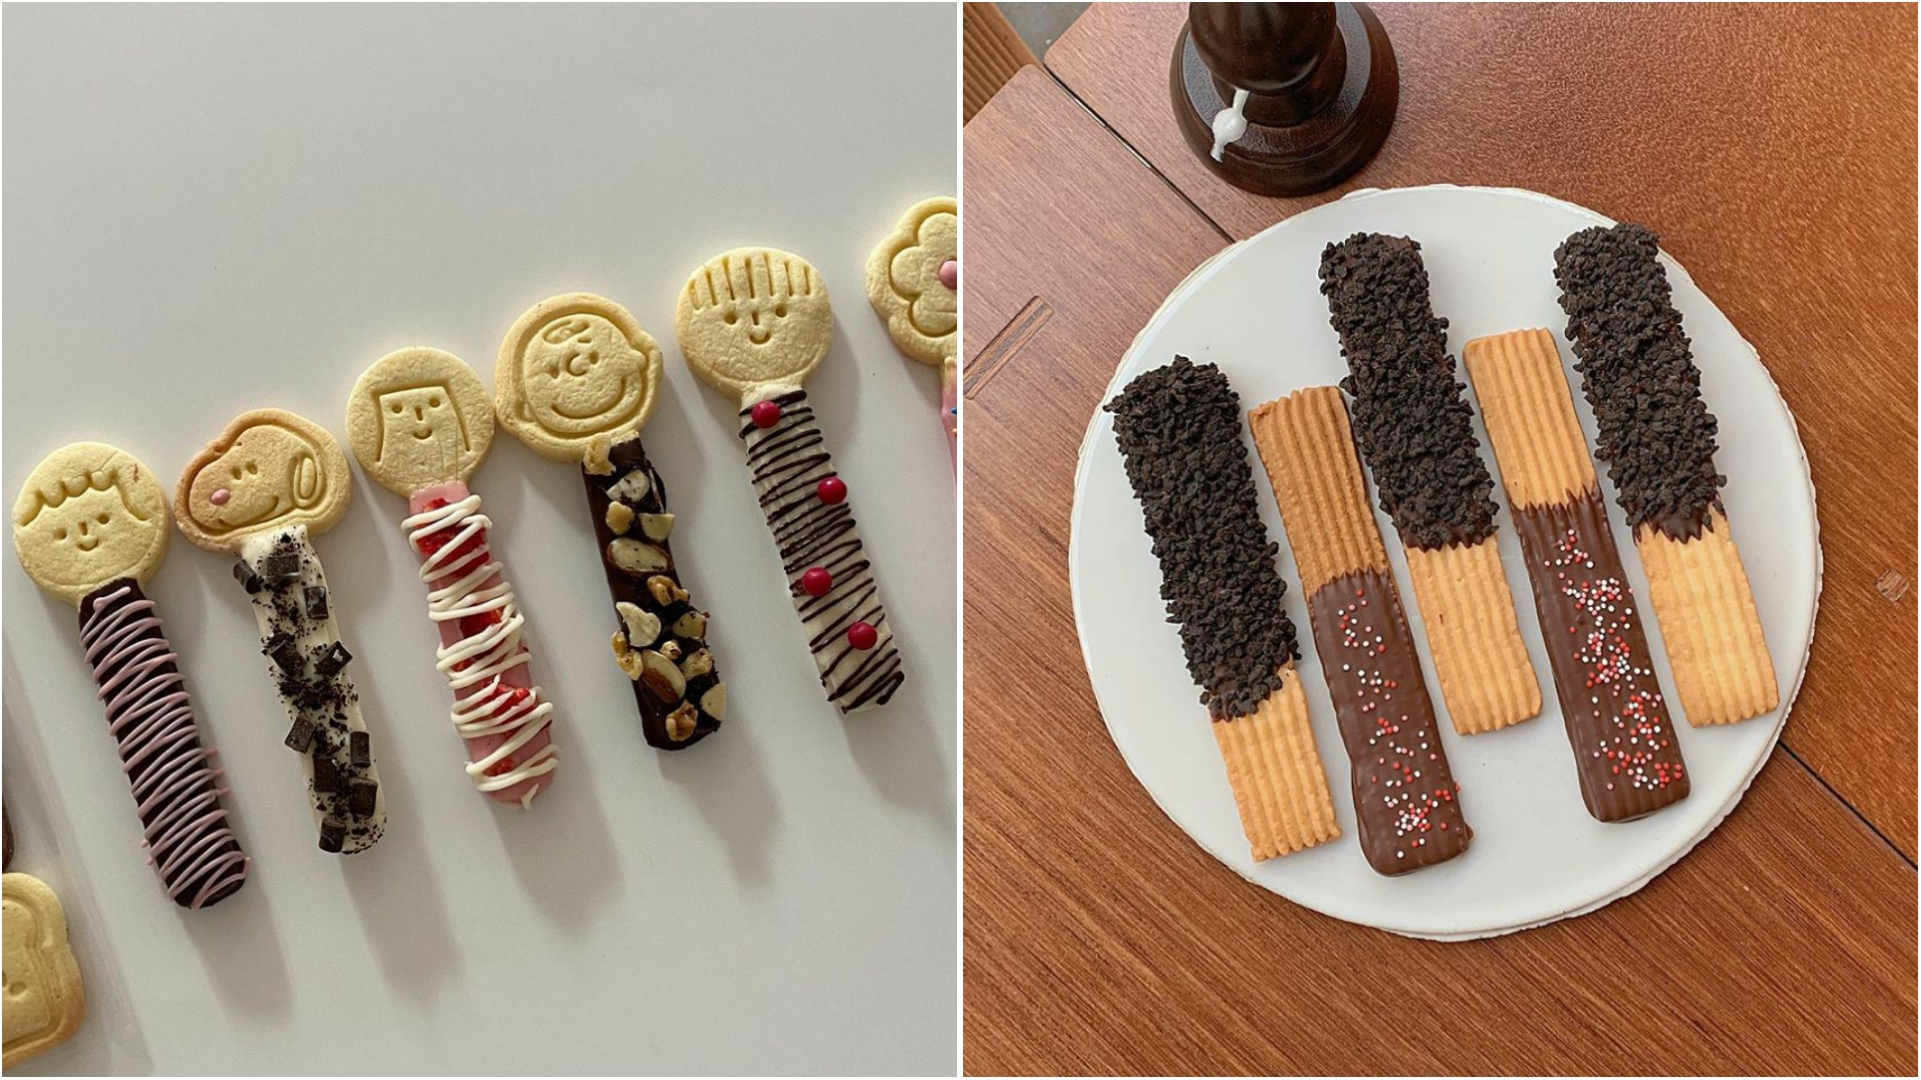 Pepero Day - Stick-shaped shortbread cookies